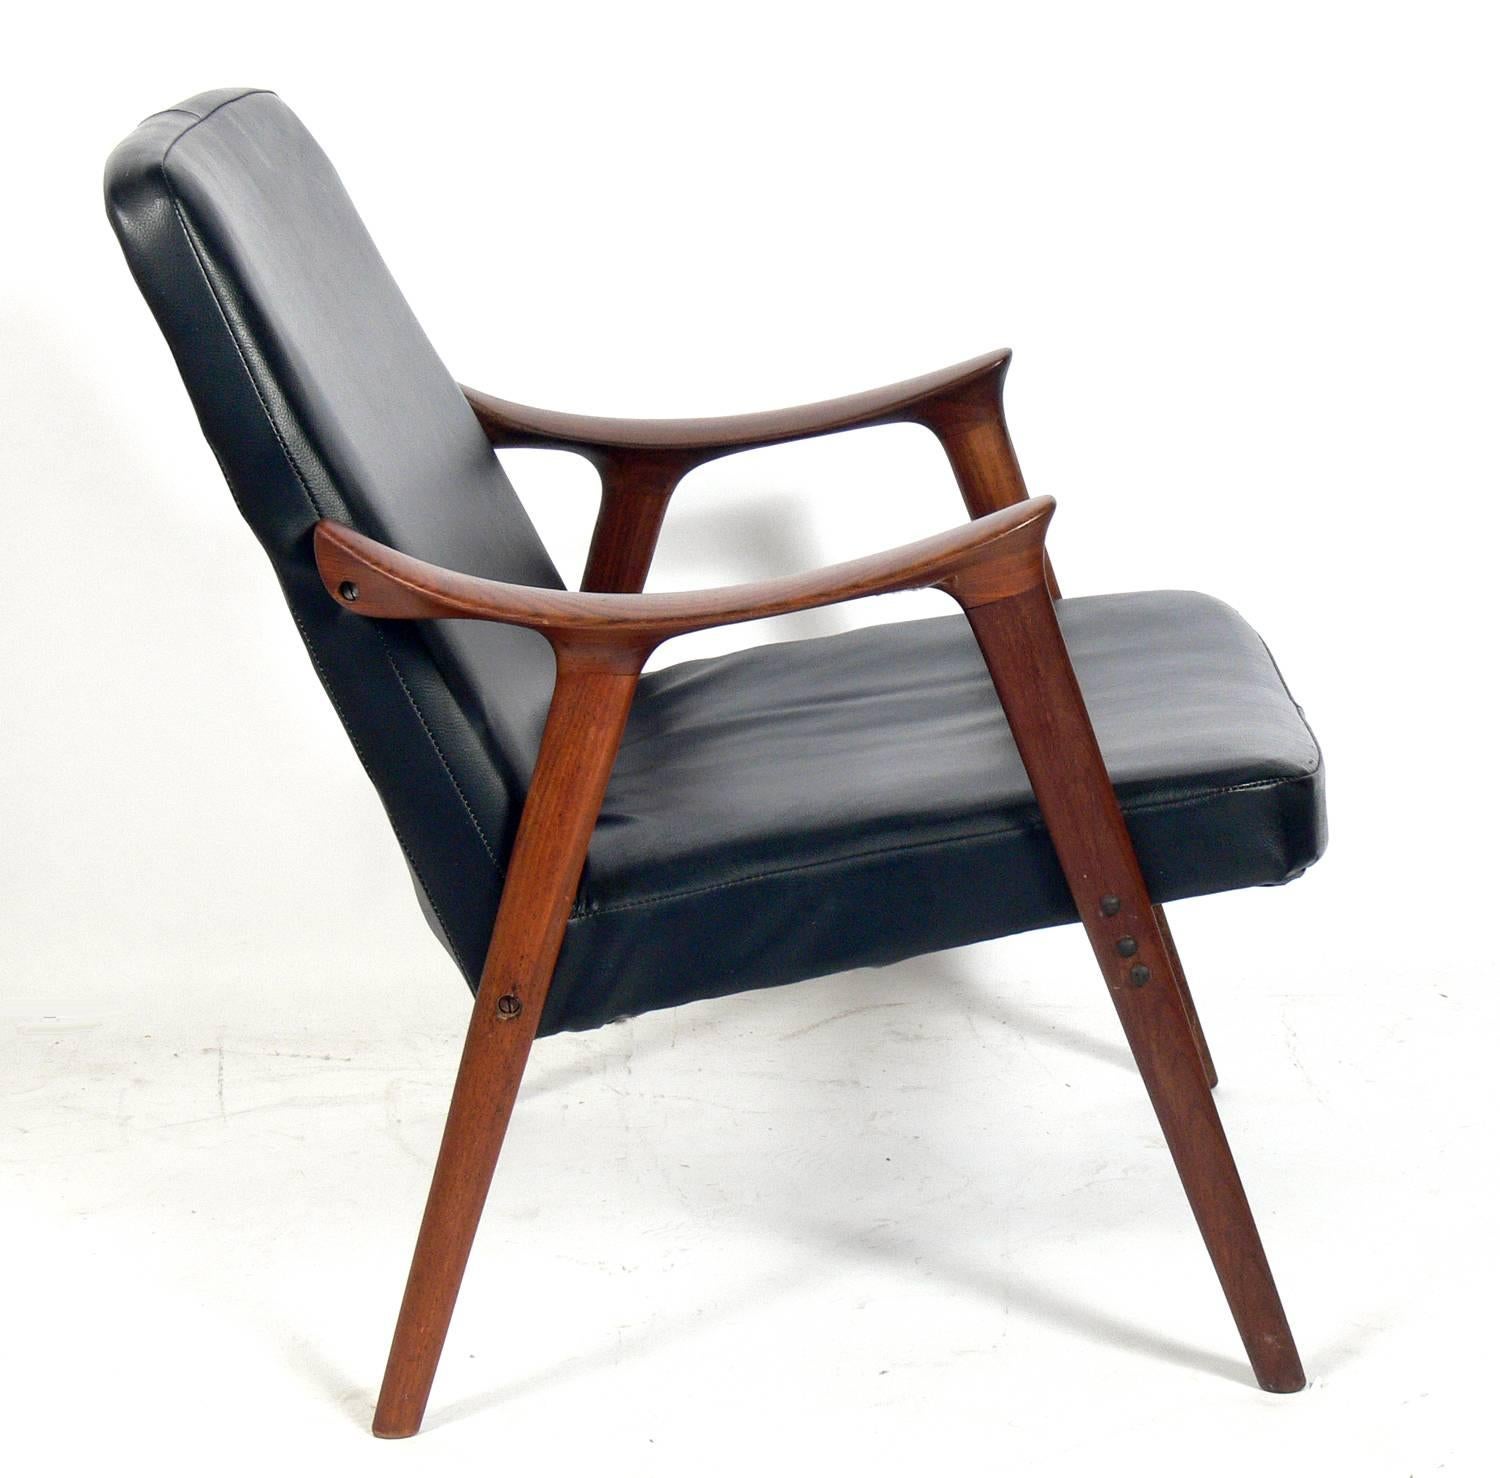 Danish modern lounge chair designed by Ingmar Relling for Westnofa, Norway, circa 1960s. This chair is currently being reupholstered and can be completed in your fabric. The price noted below includes reupholstery in your fabric.